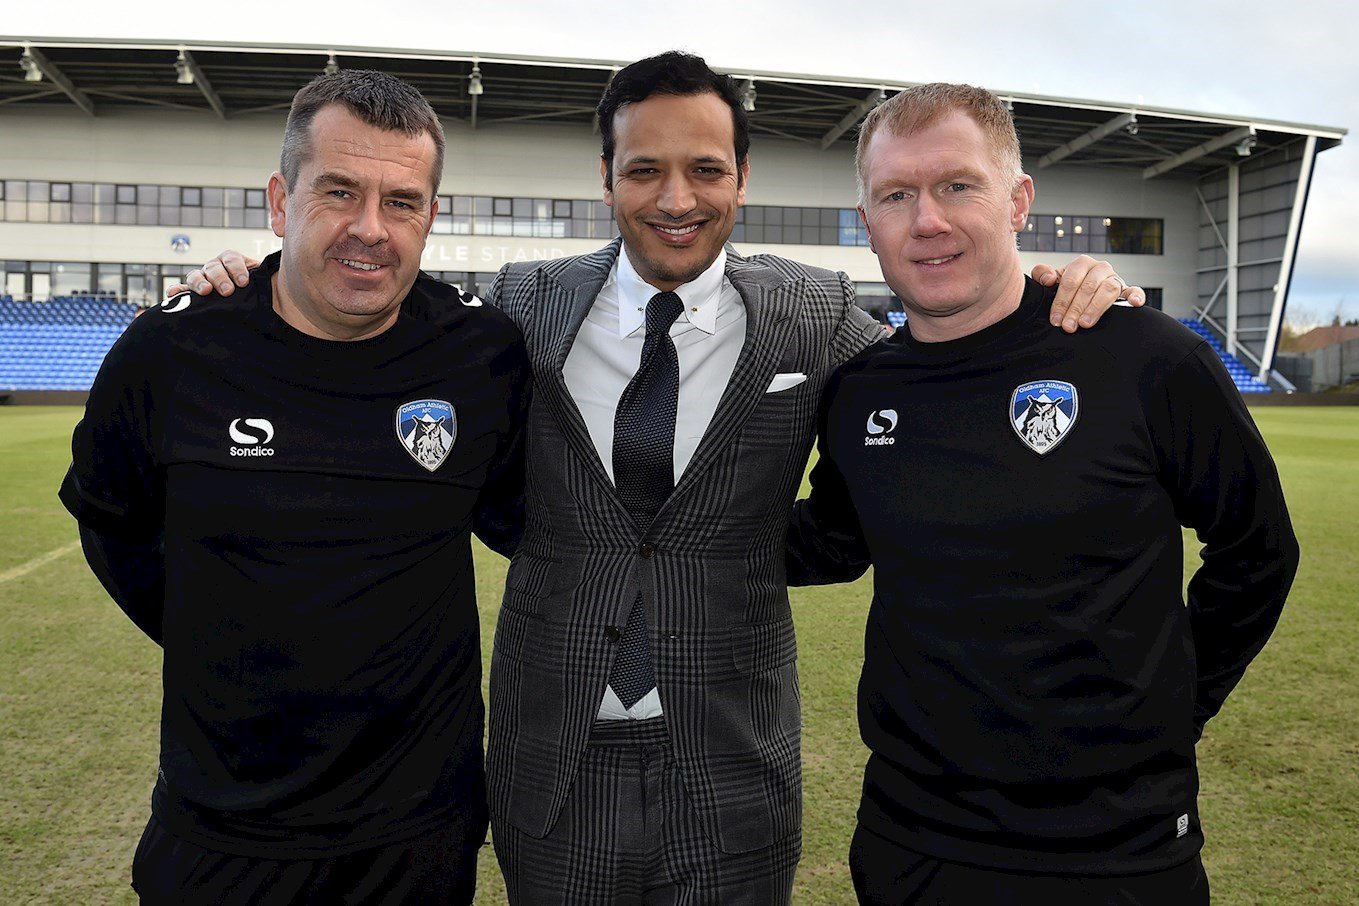 Latics Appoint Paul Scholes As New Manager - News - Oldham Athletic